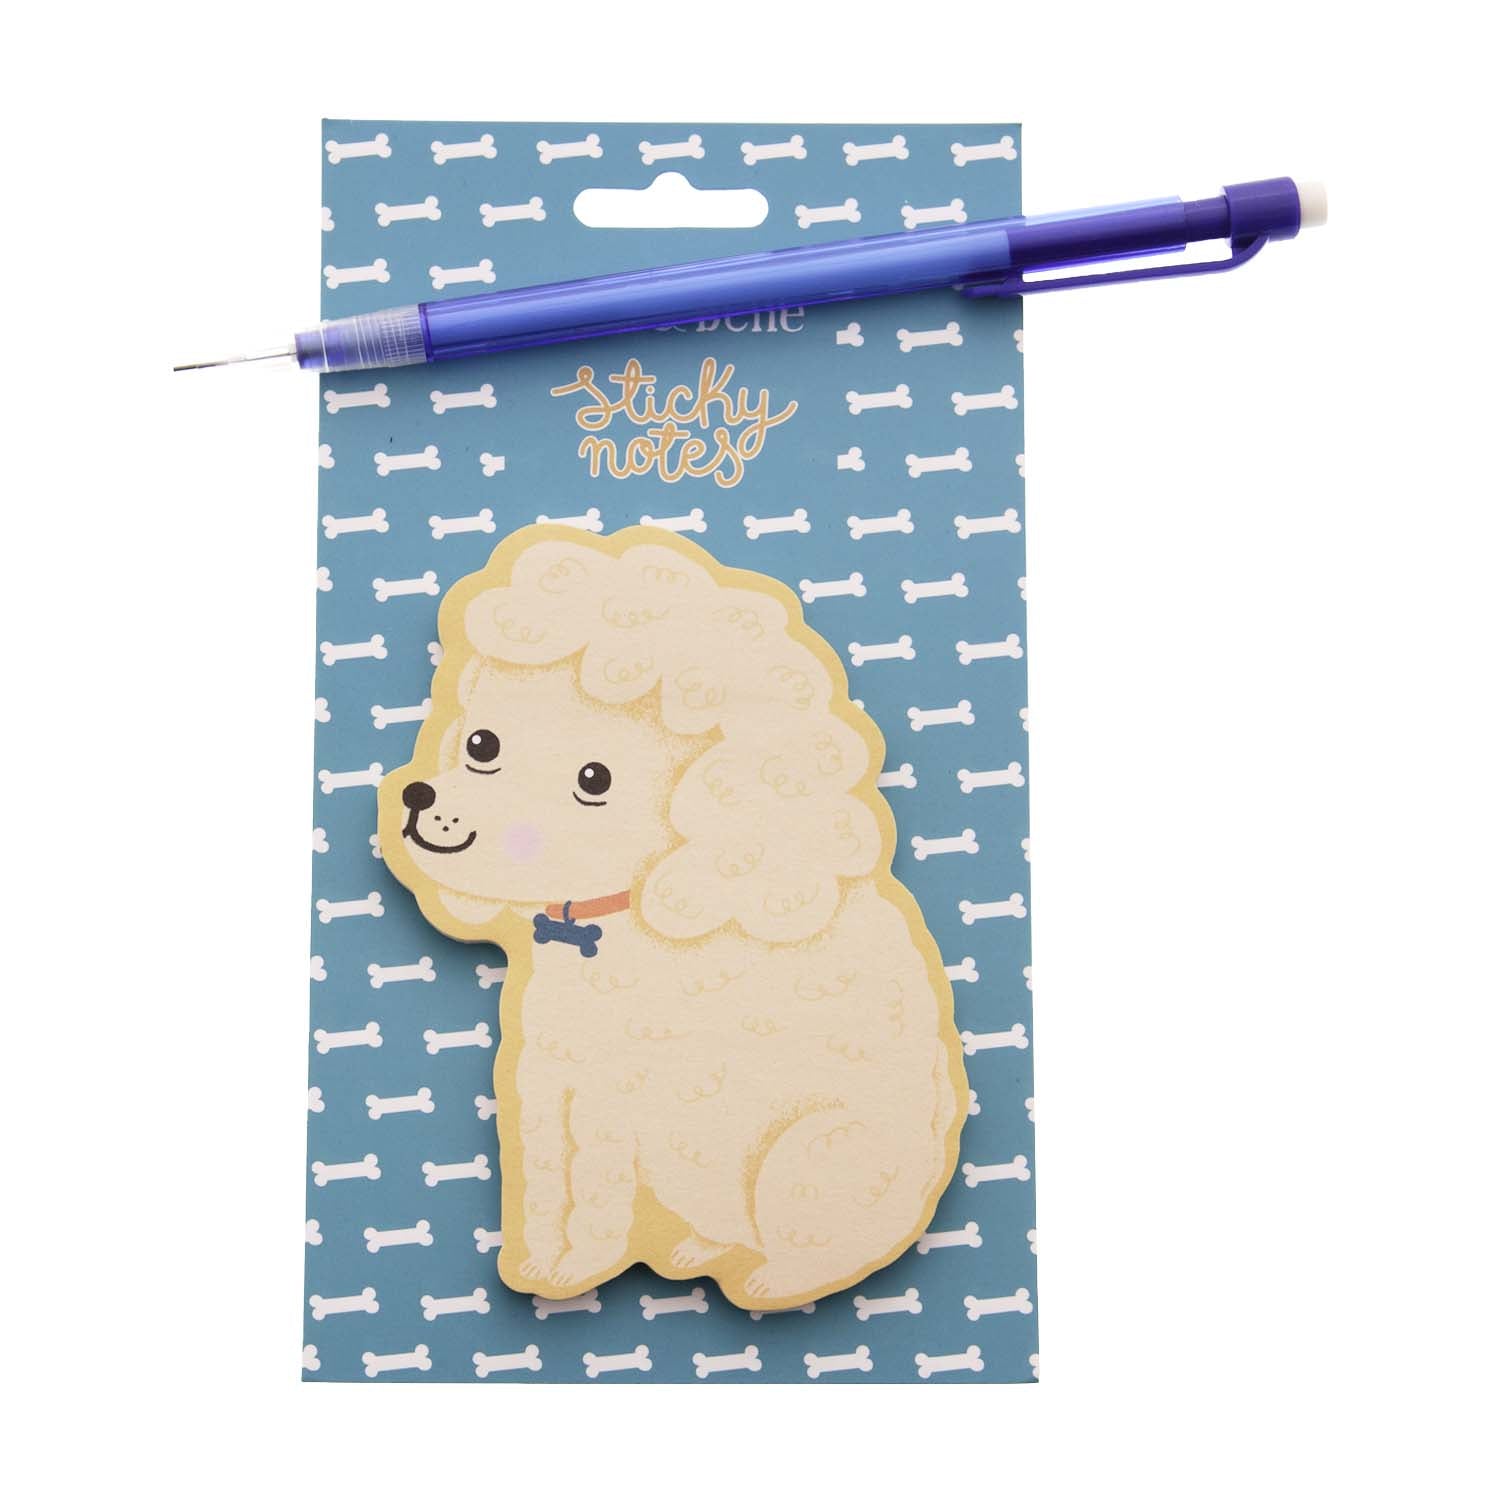 Dog Lover Gifts available at Dog Krazy Gifts – Puppy Dog Playtime Sticky Note Pad available at www.dogkrazygifts.co.uk